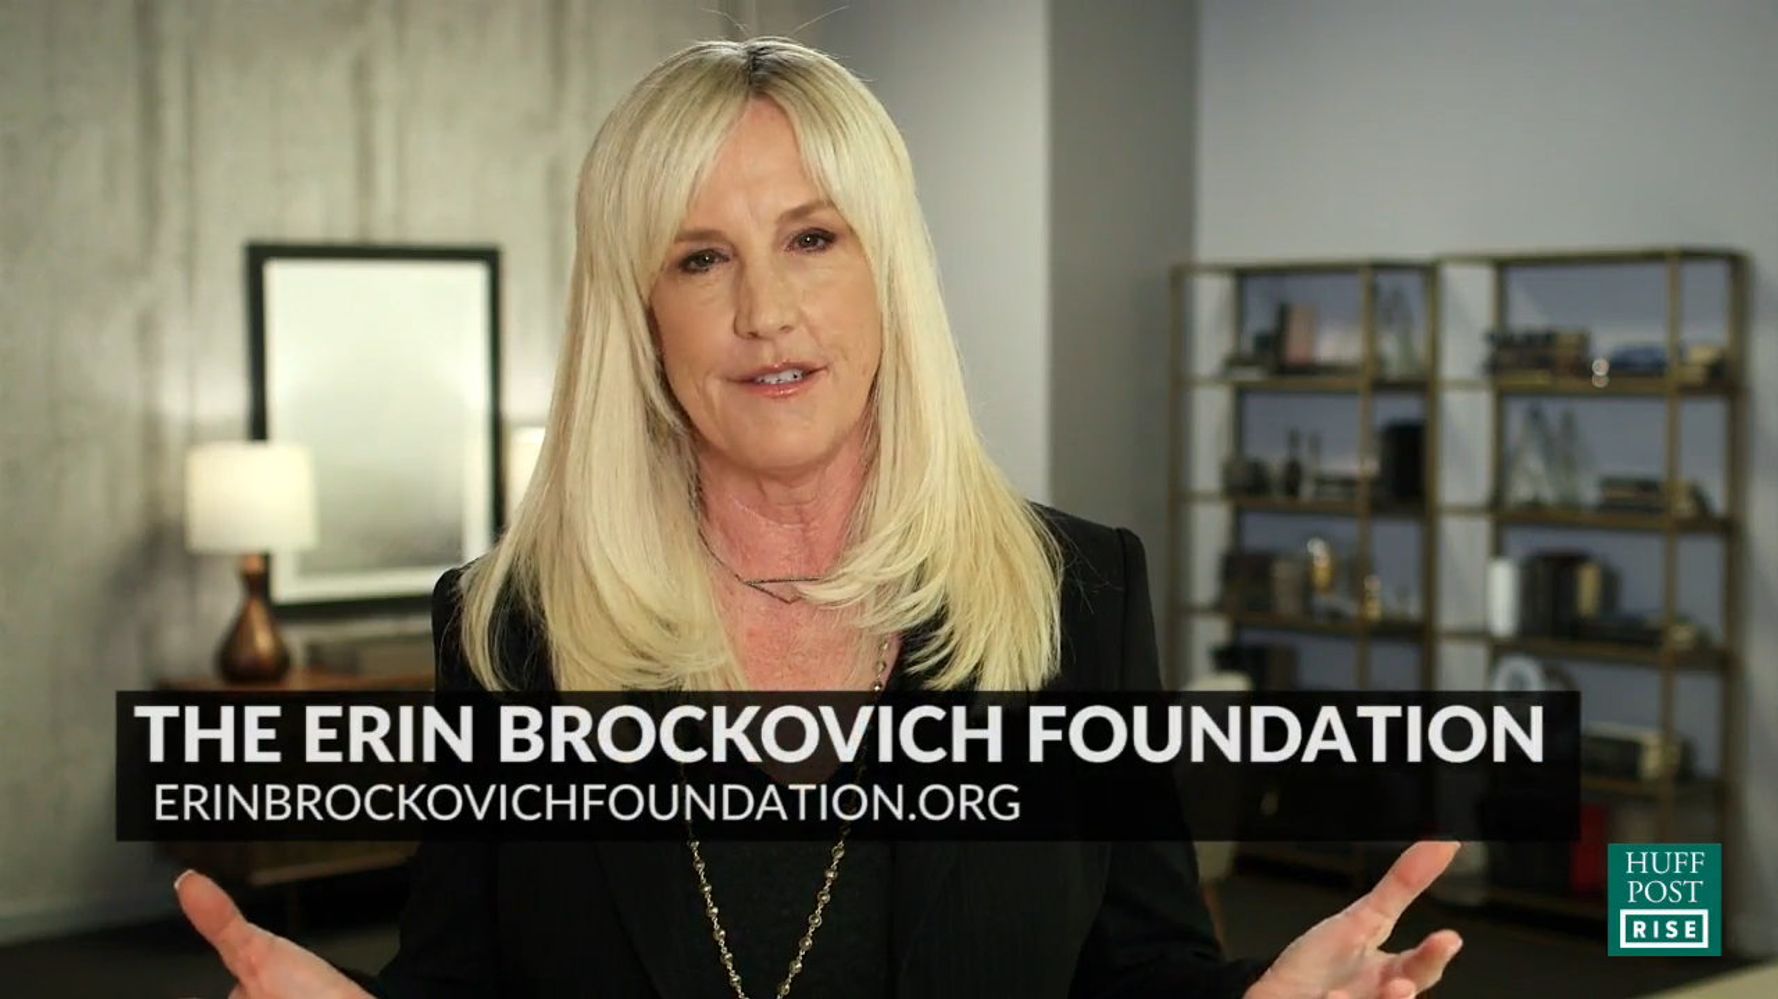 Erin Brockovich Talks About Her Foundation To Help The Environment